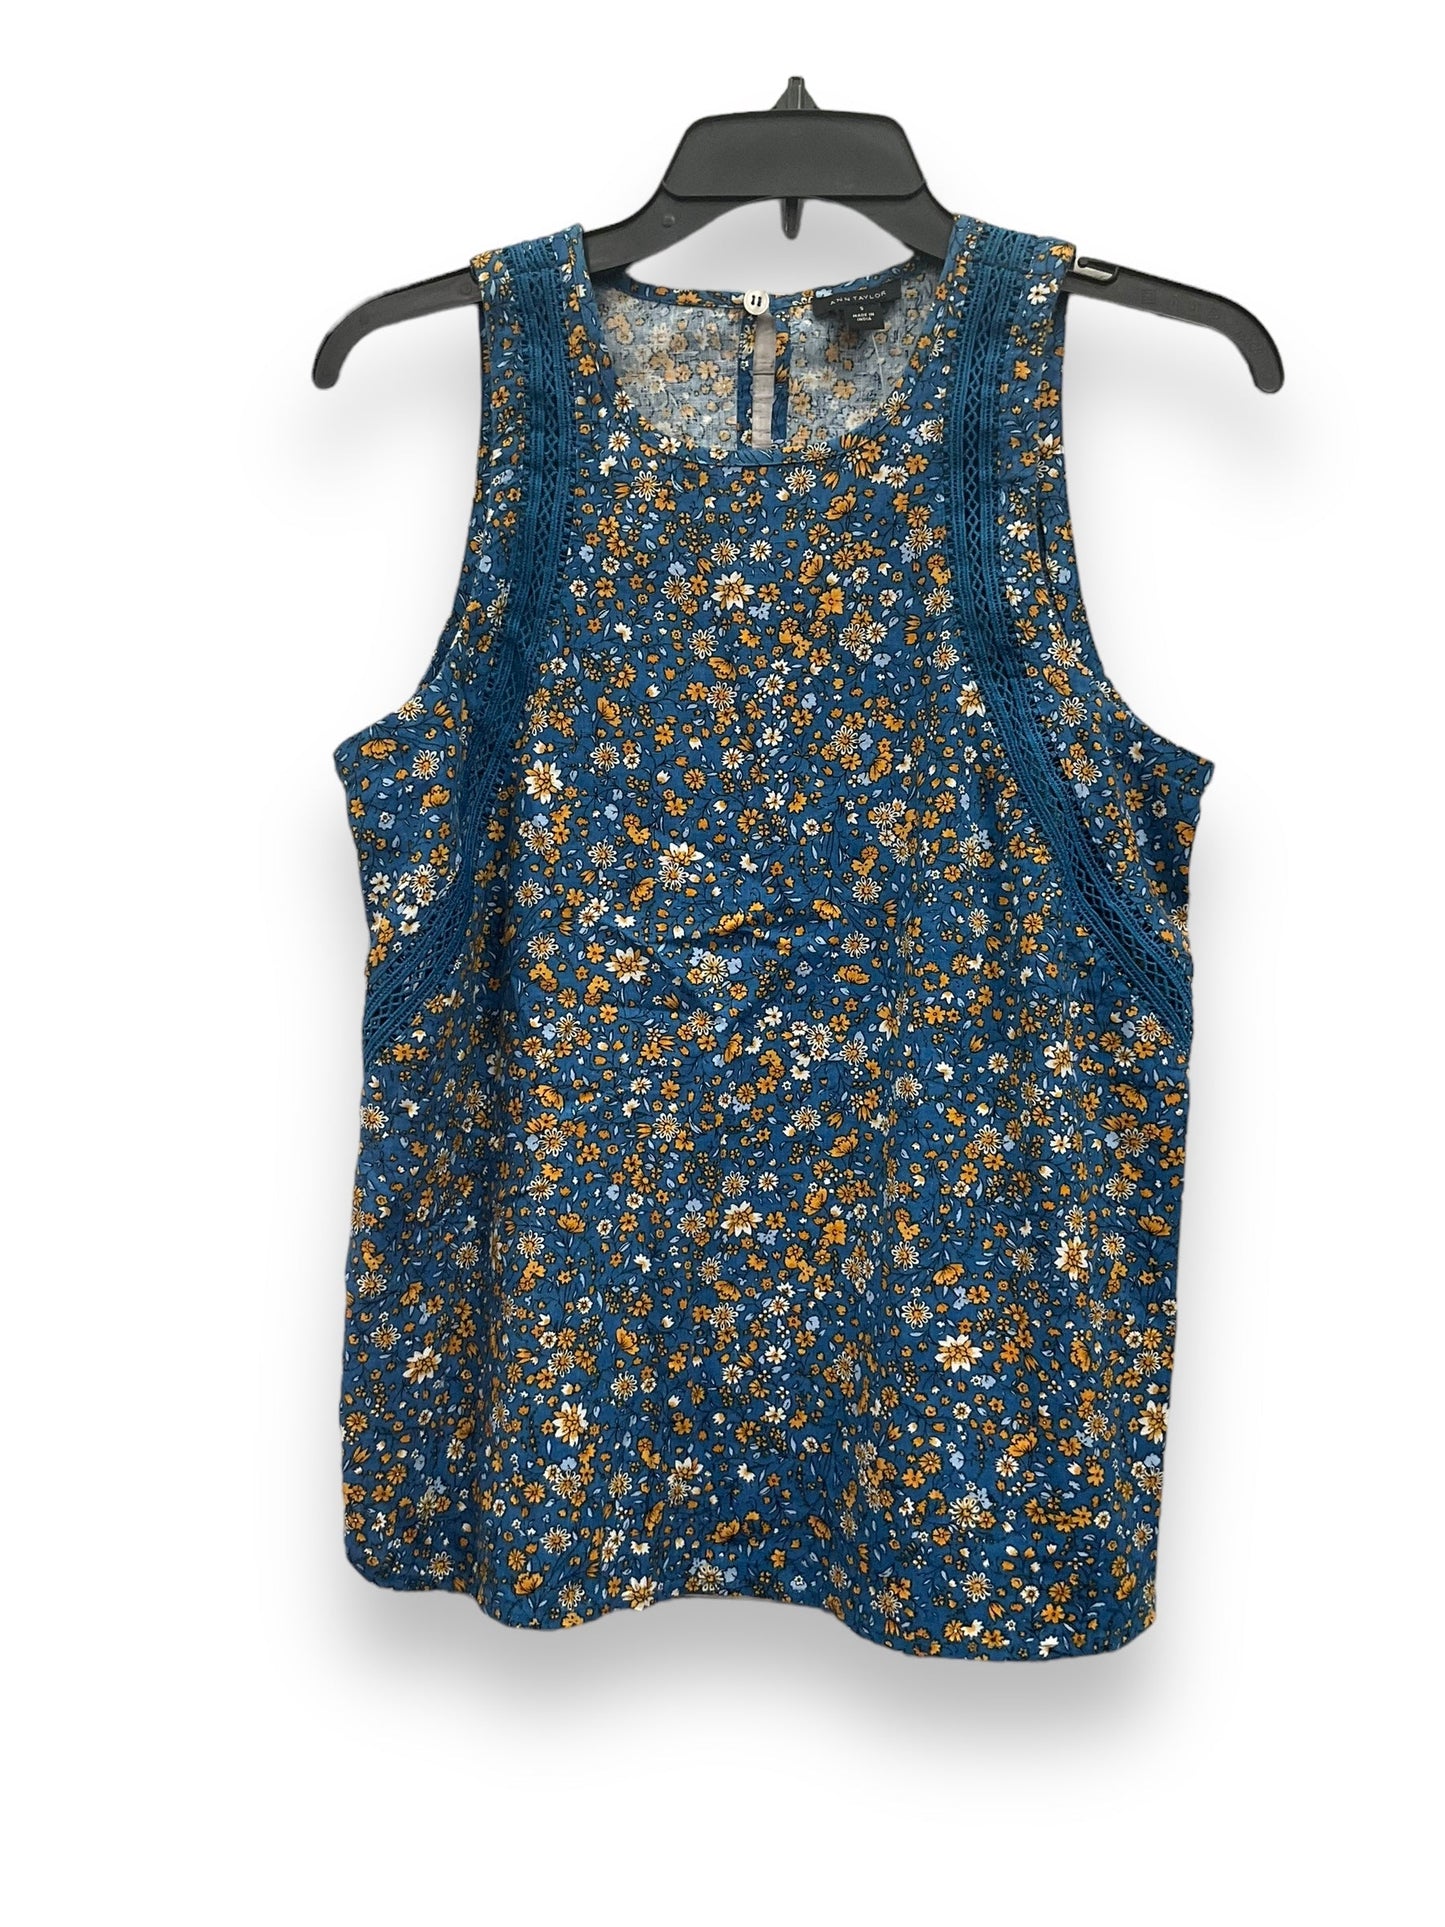 Floral Print Top Sleeveless Ann Taylor, Size S